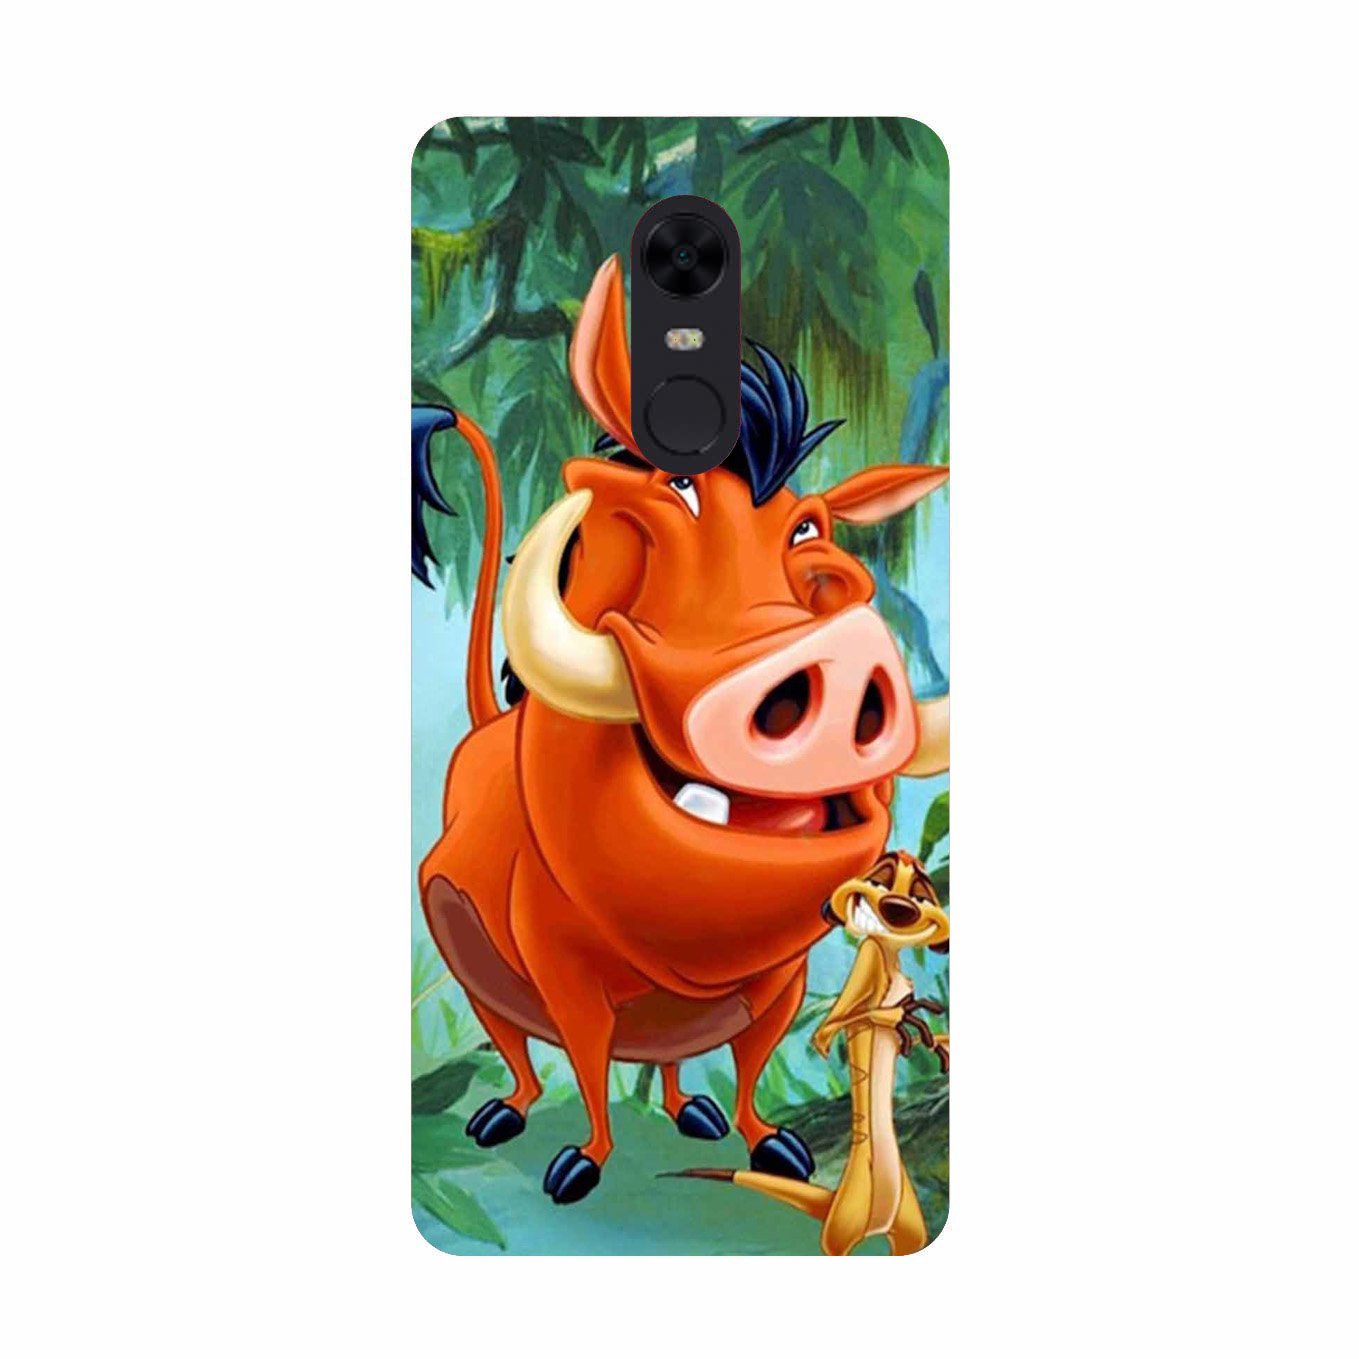 Timon and Pumbaa Mobile Back Case for Redmi 5(Design - 305)